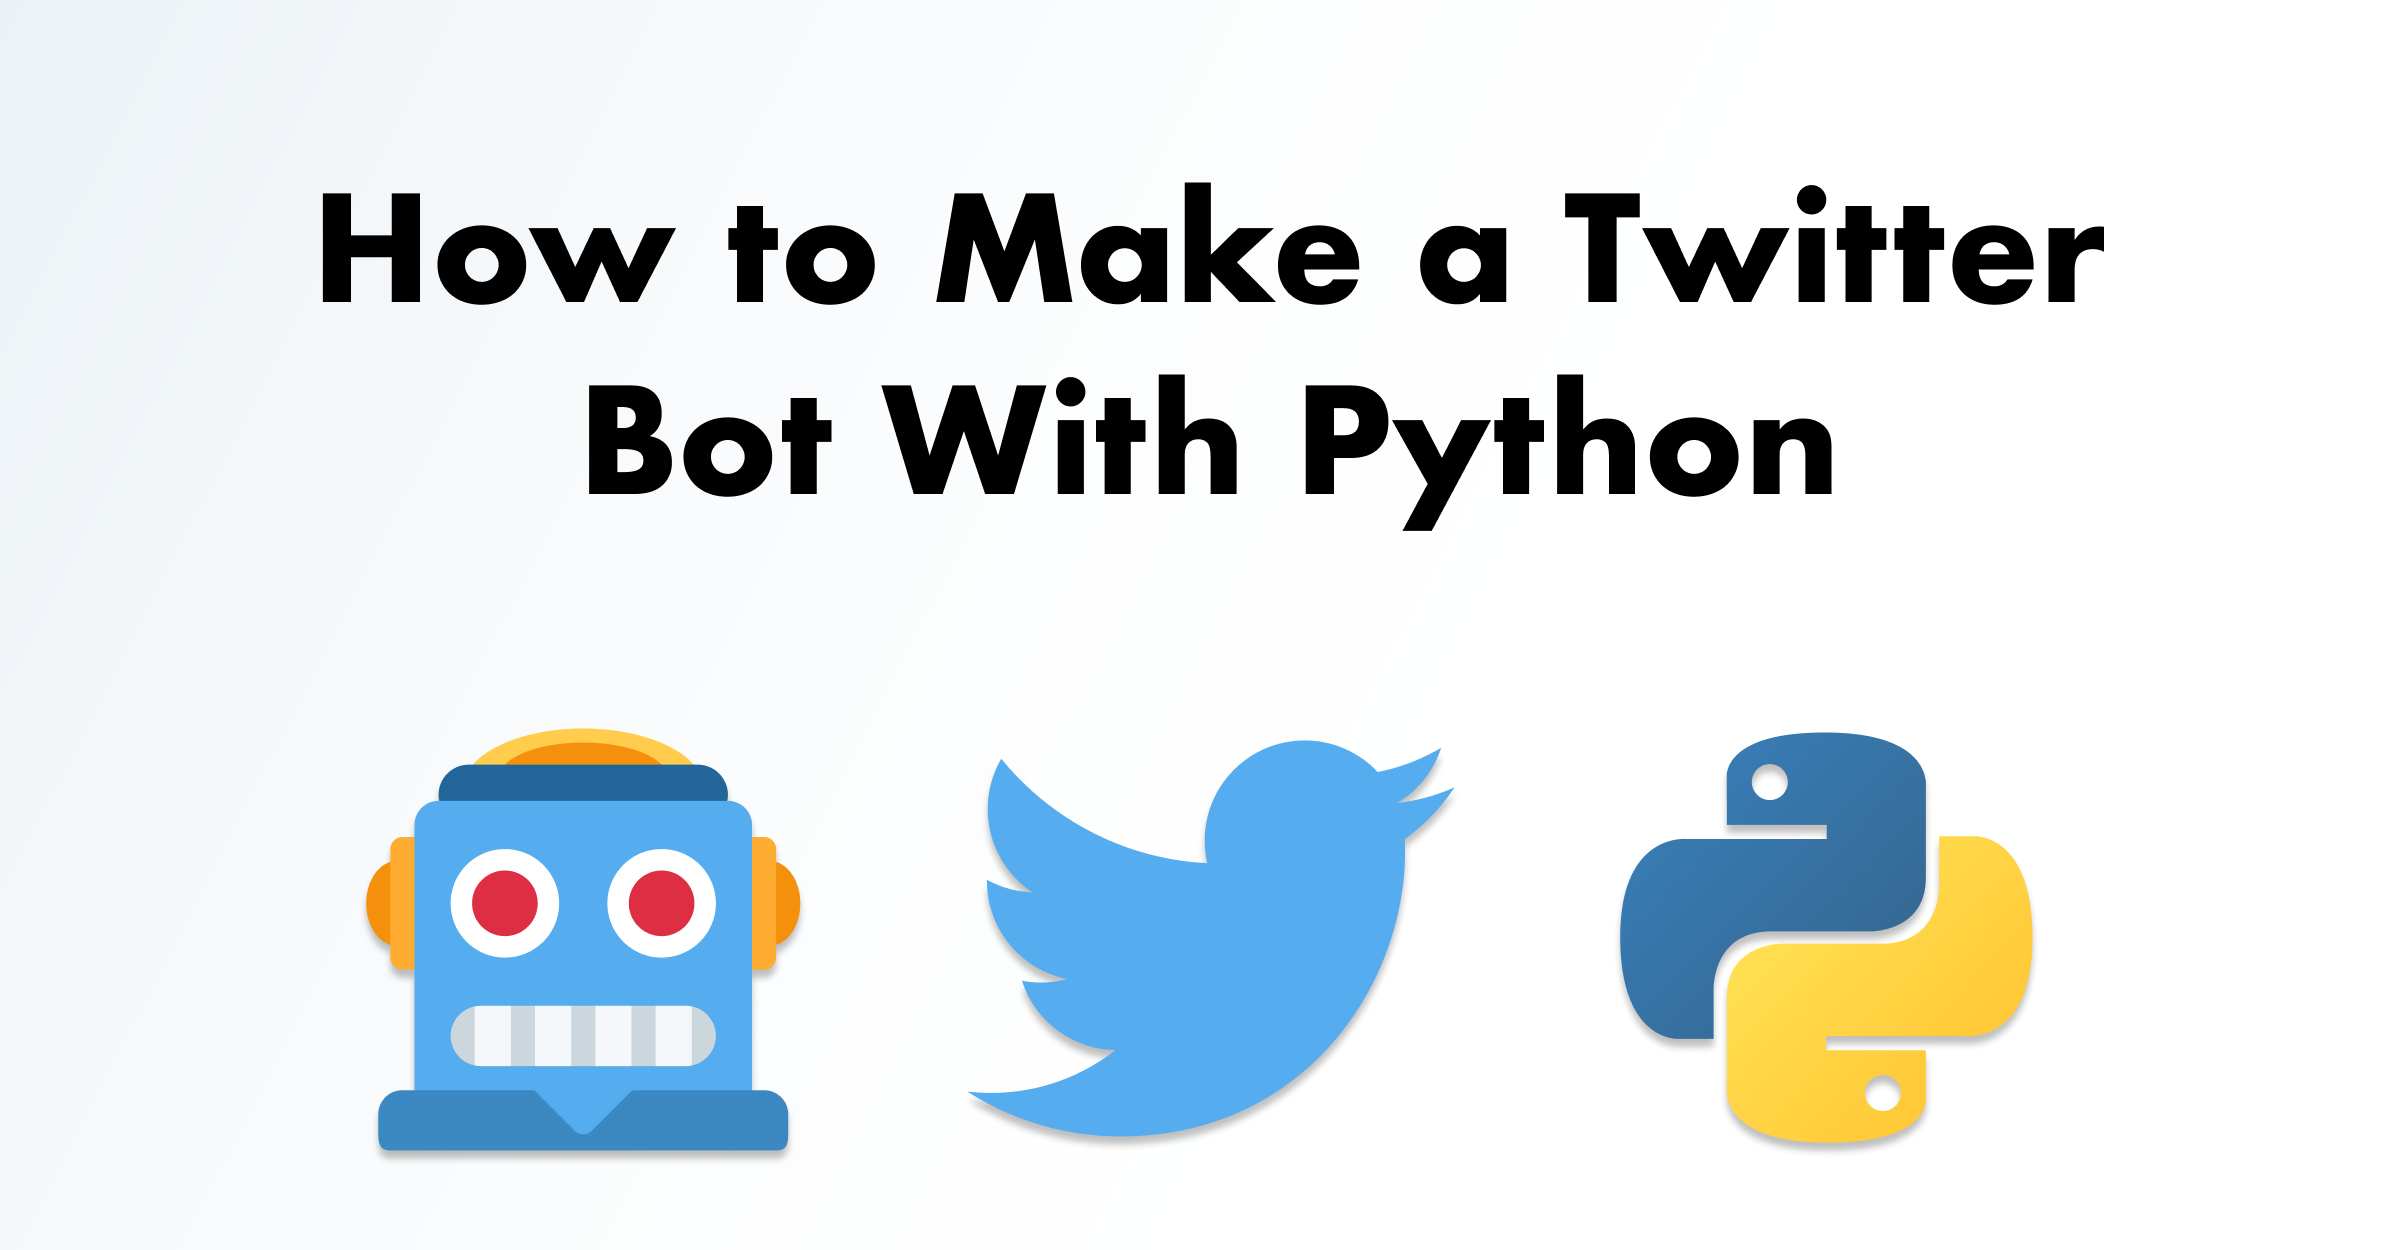 How to Make a Twitter Bot With Python